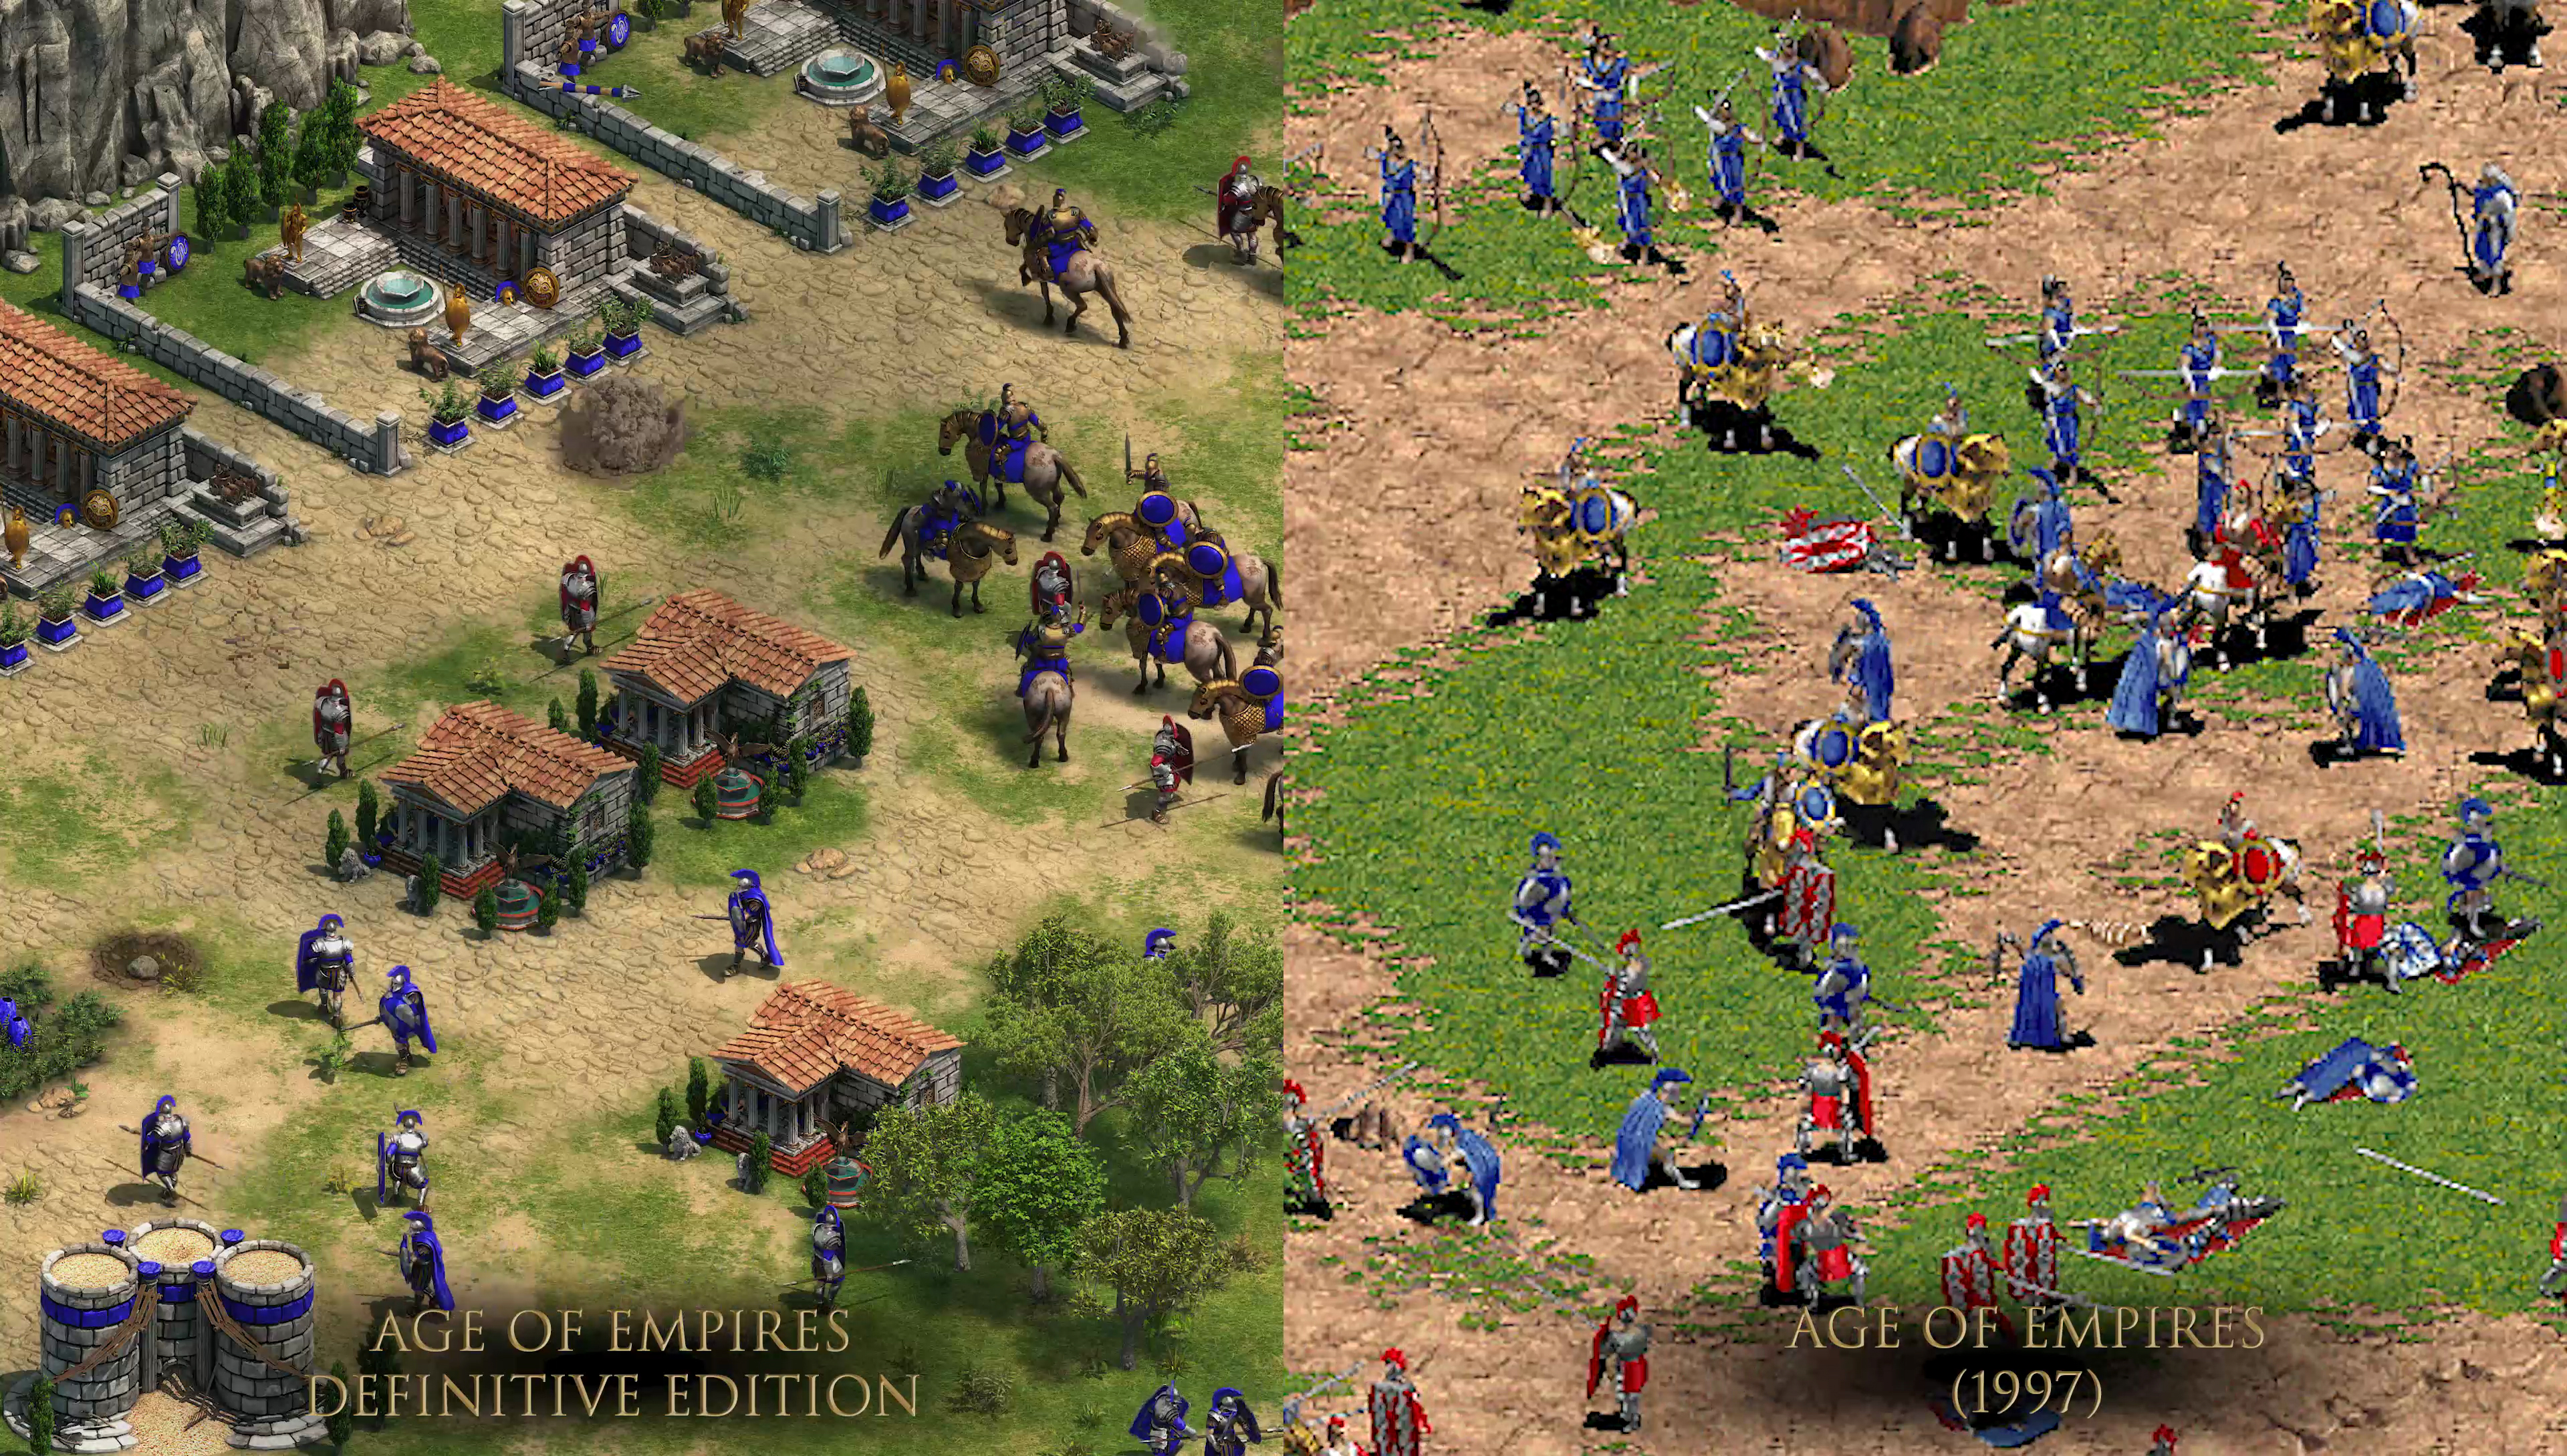 Age of Empires II: The Forgotten - Wikipedia